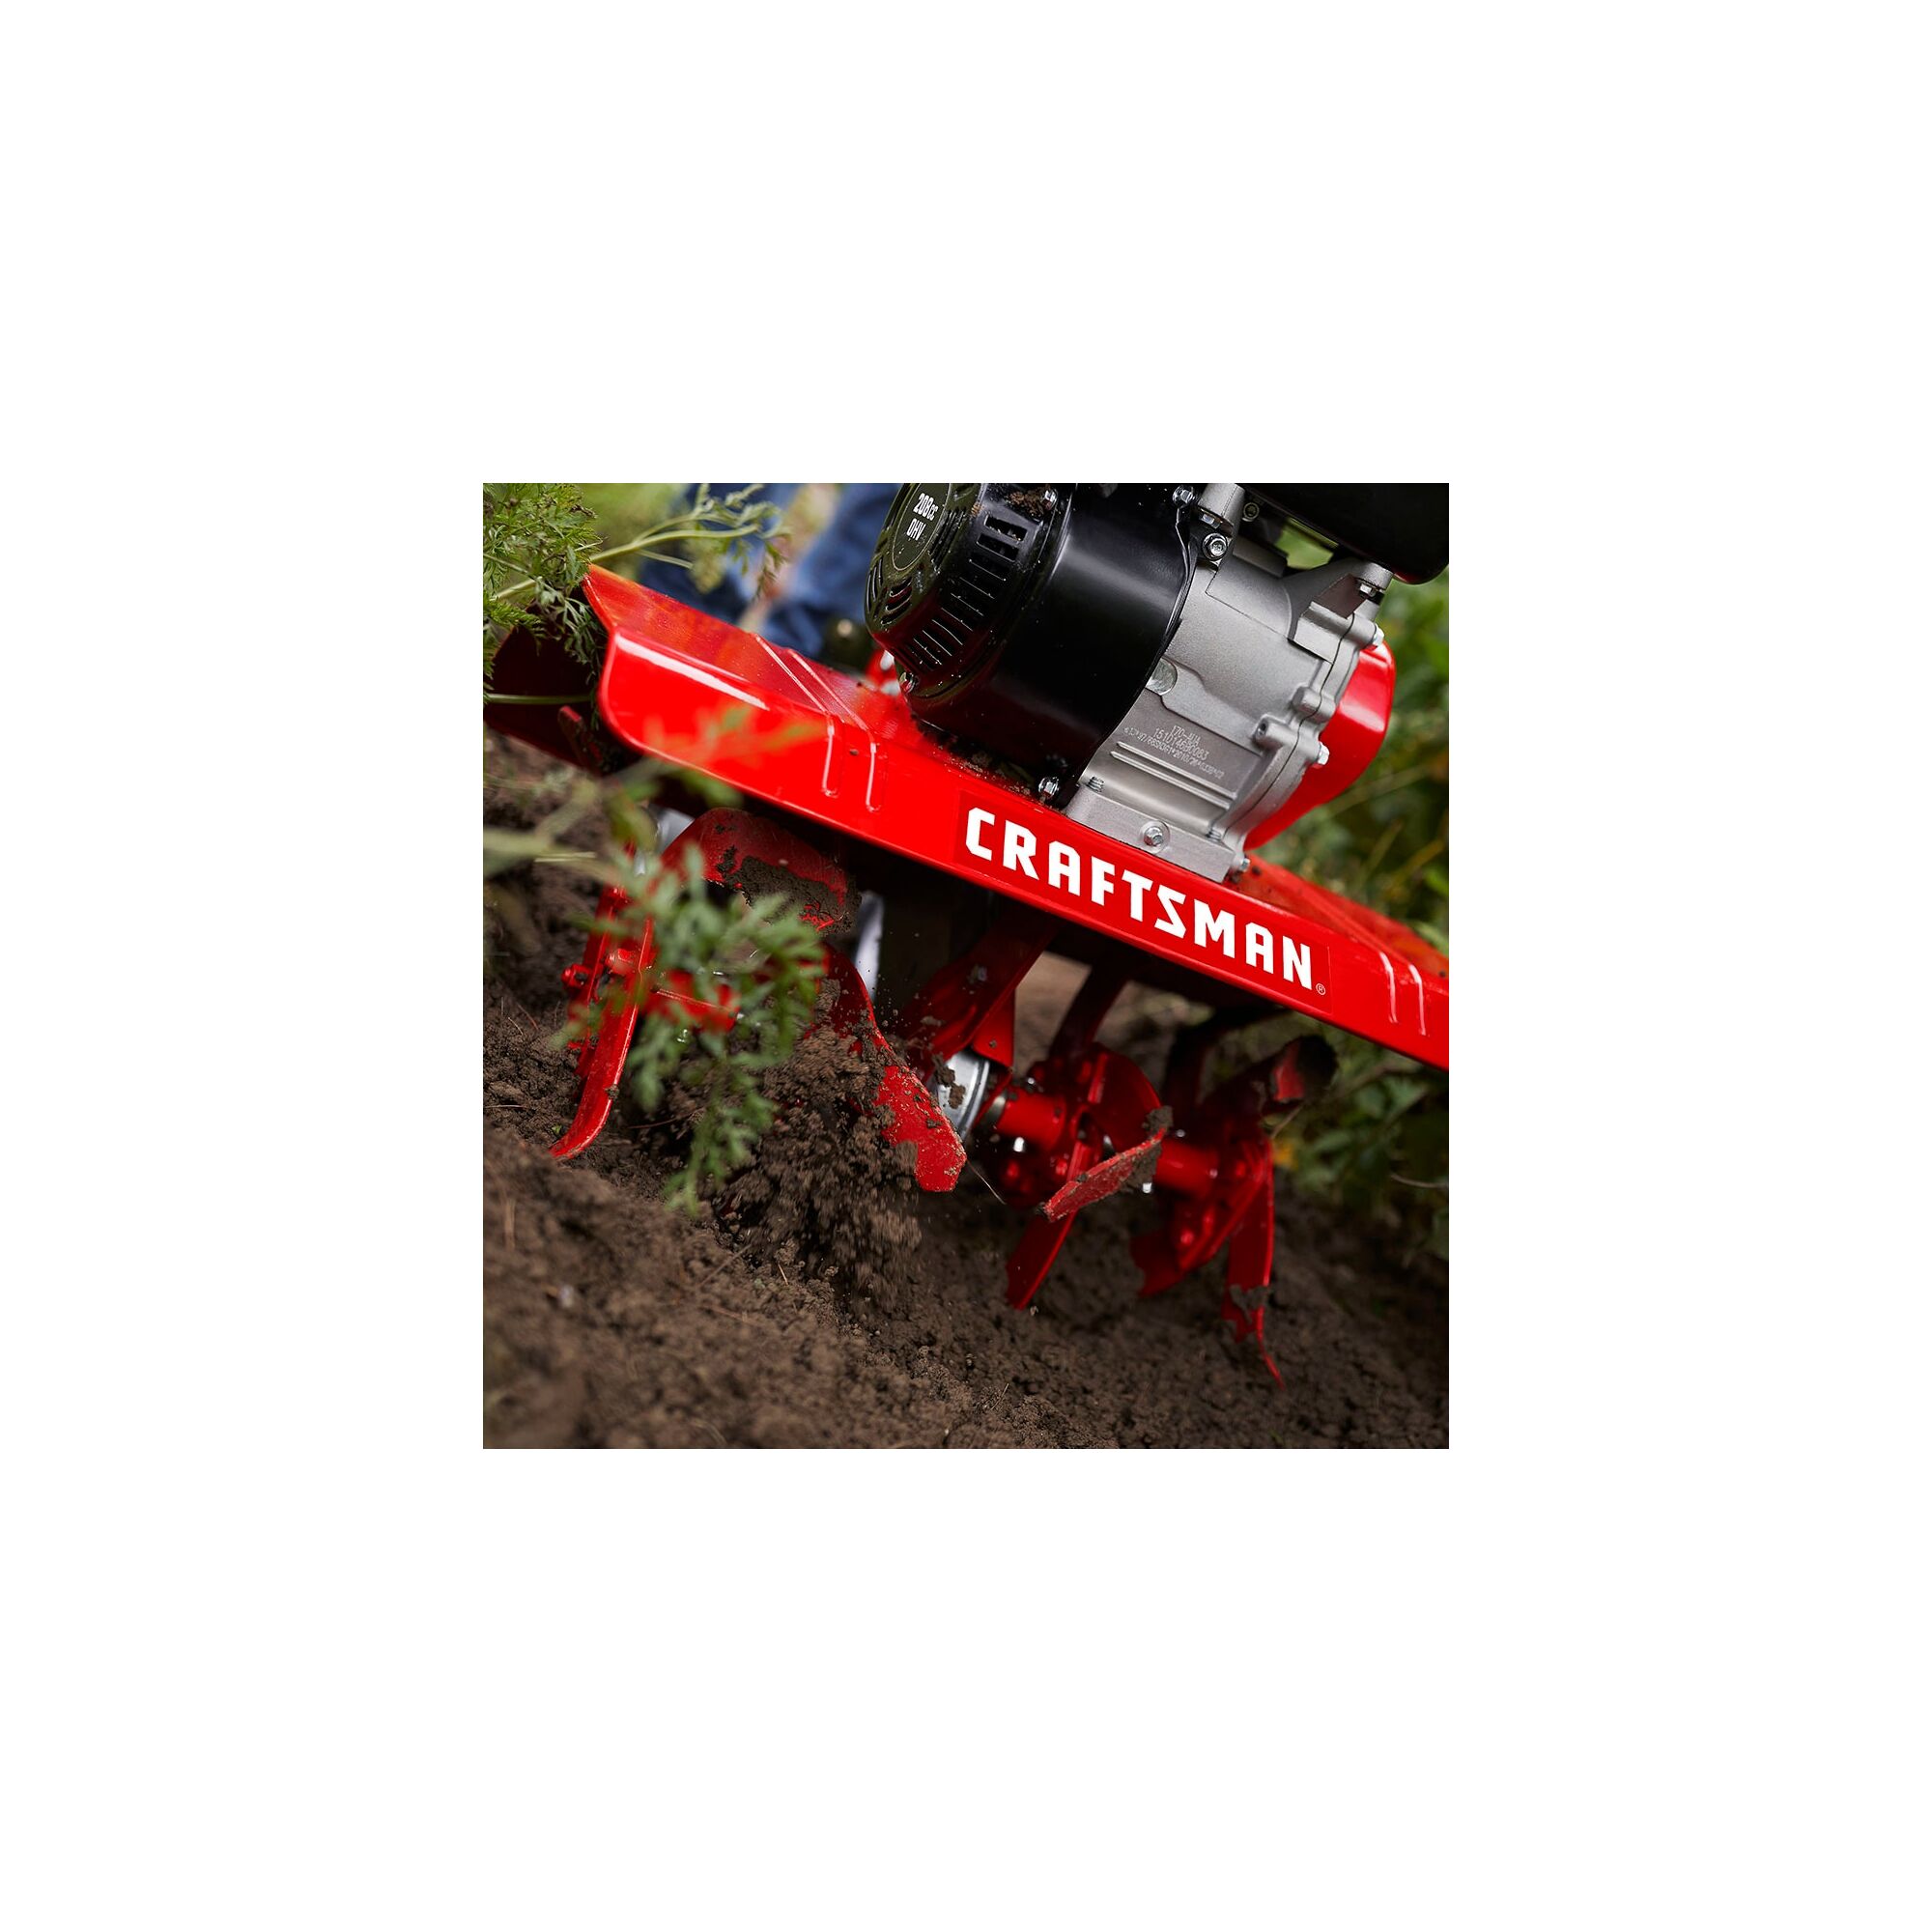 View of CRAFTSMAN Tillers highlighting product features